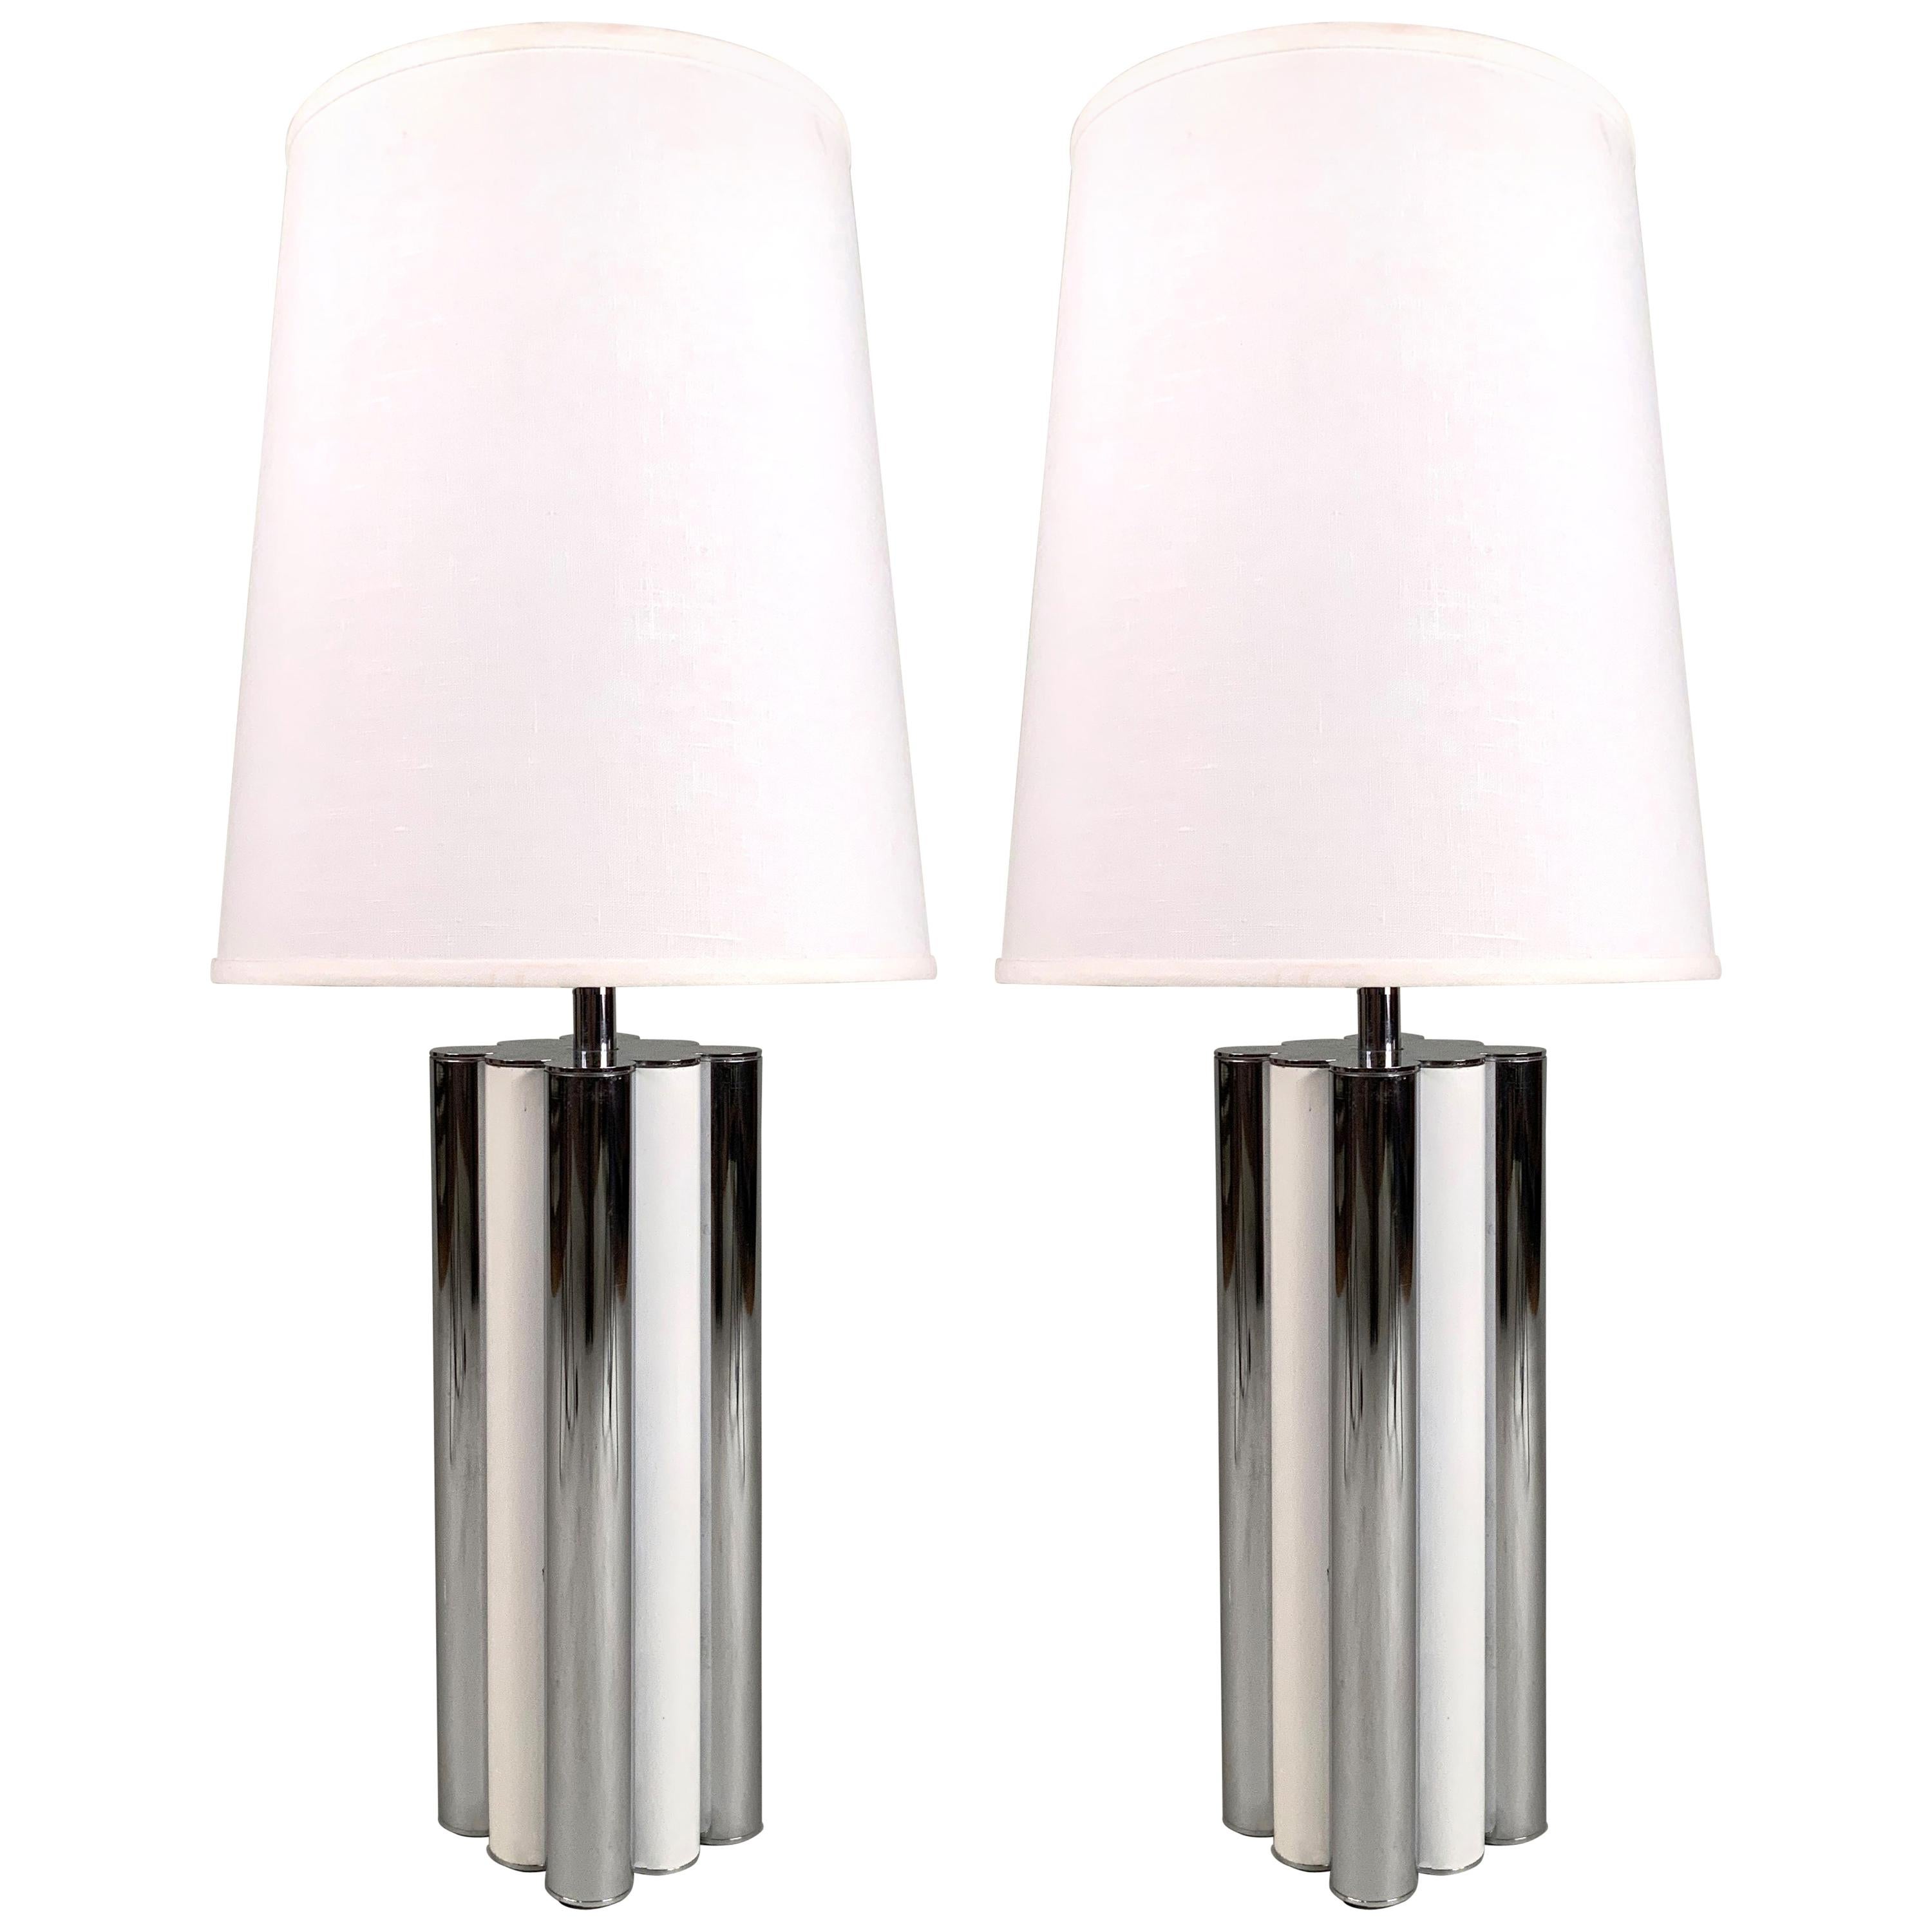 Pair of 1970s Chrome and White Lacquer Tubular Lamps by Mutual Sunset